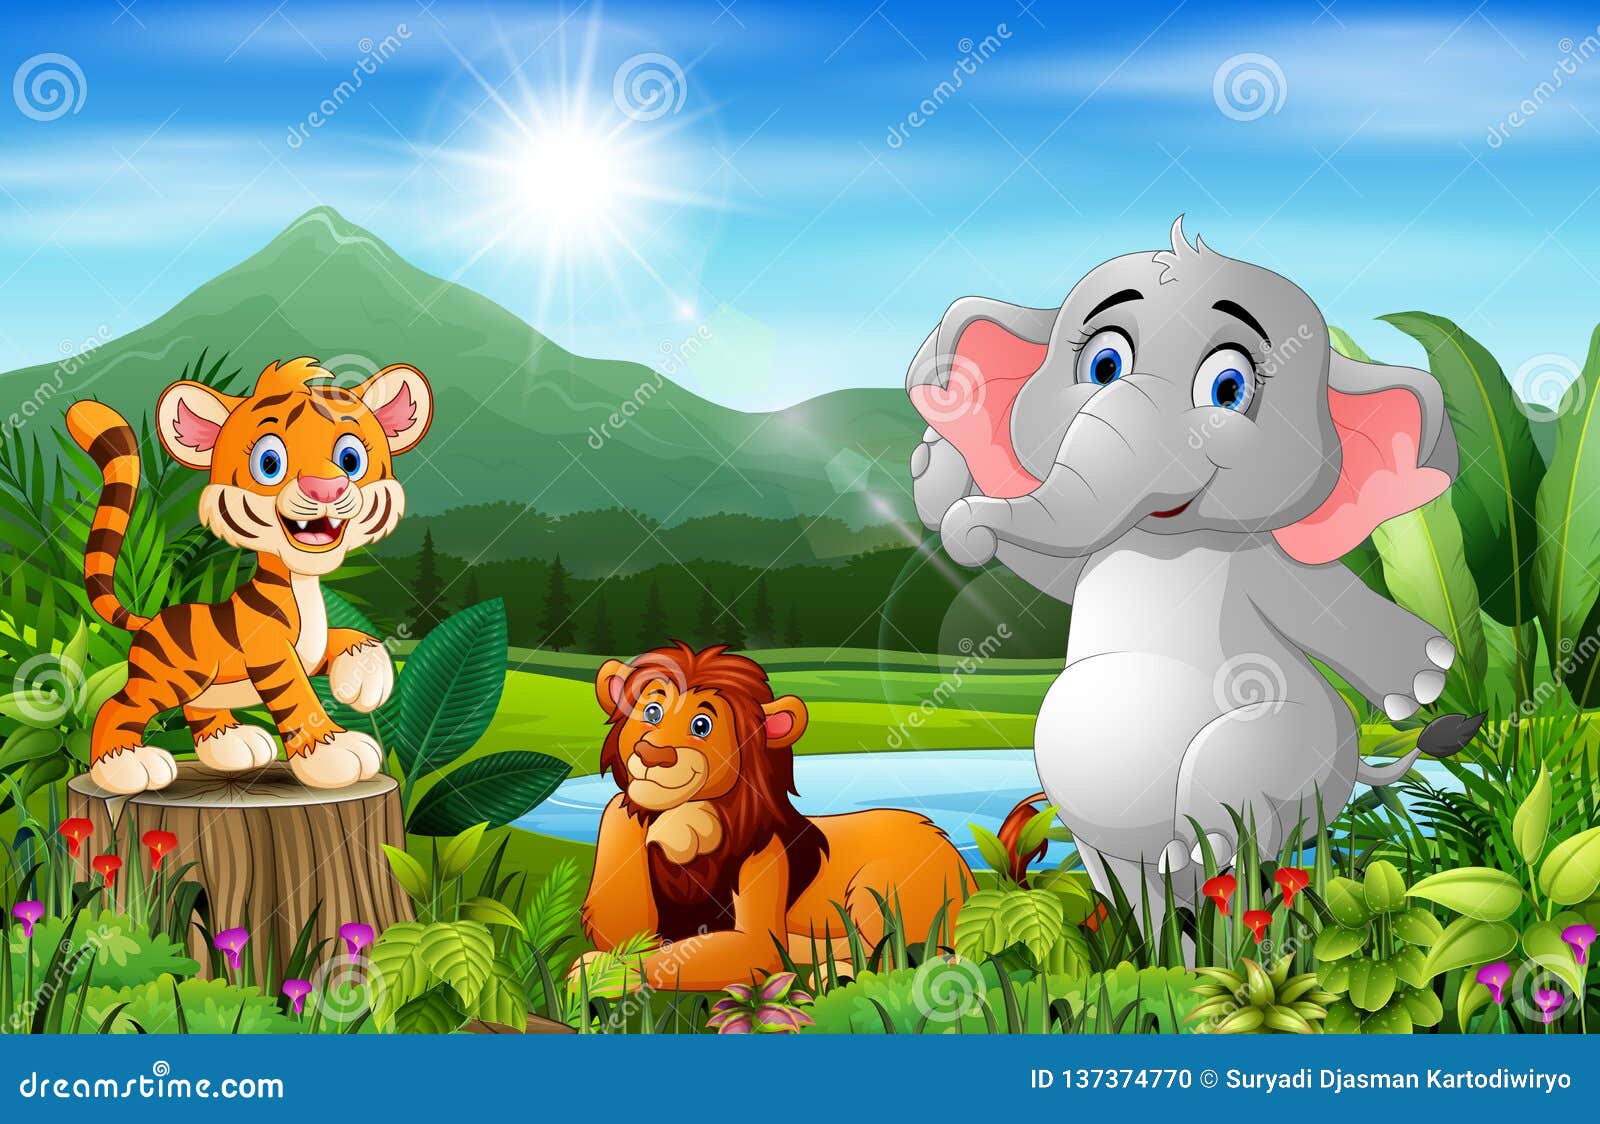 Landscape Forest with Happy Animals Cartoon Stock Vector - Illustration of  funny, gesturing: 137374770